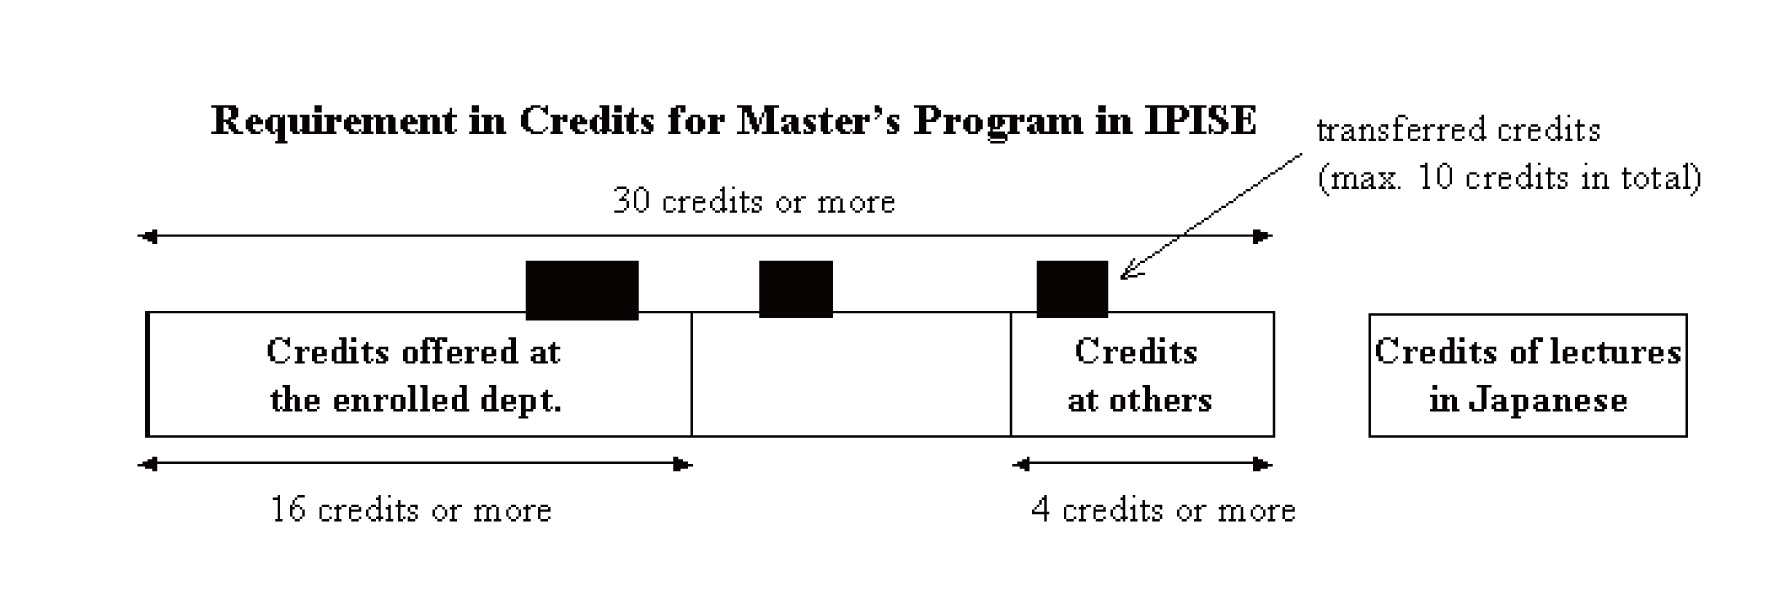 Requirement in Credits for Master's Program in IPISE